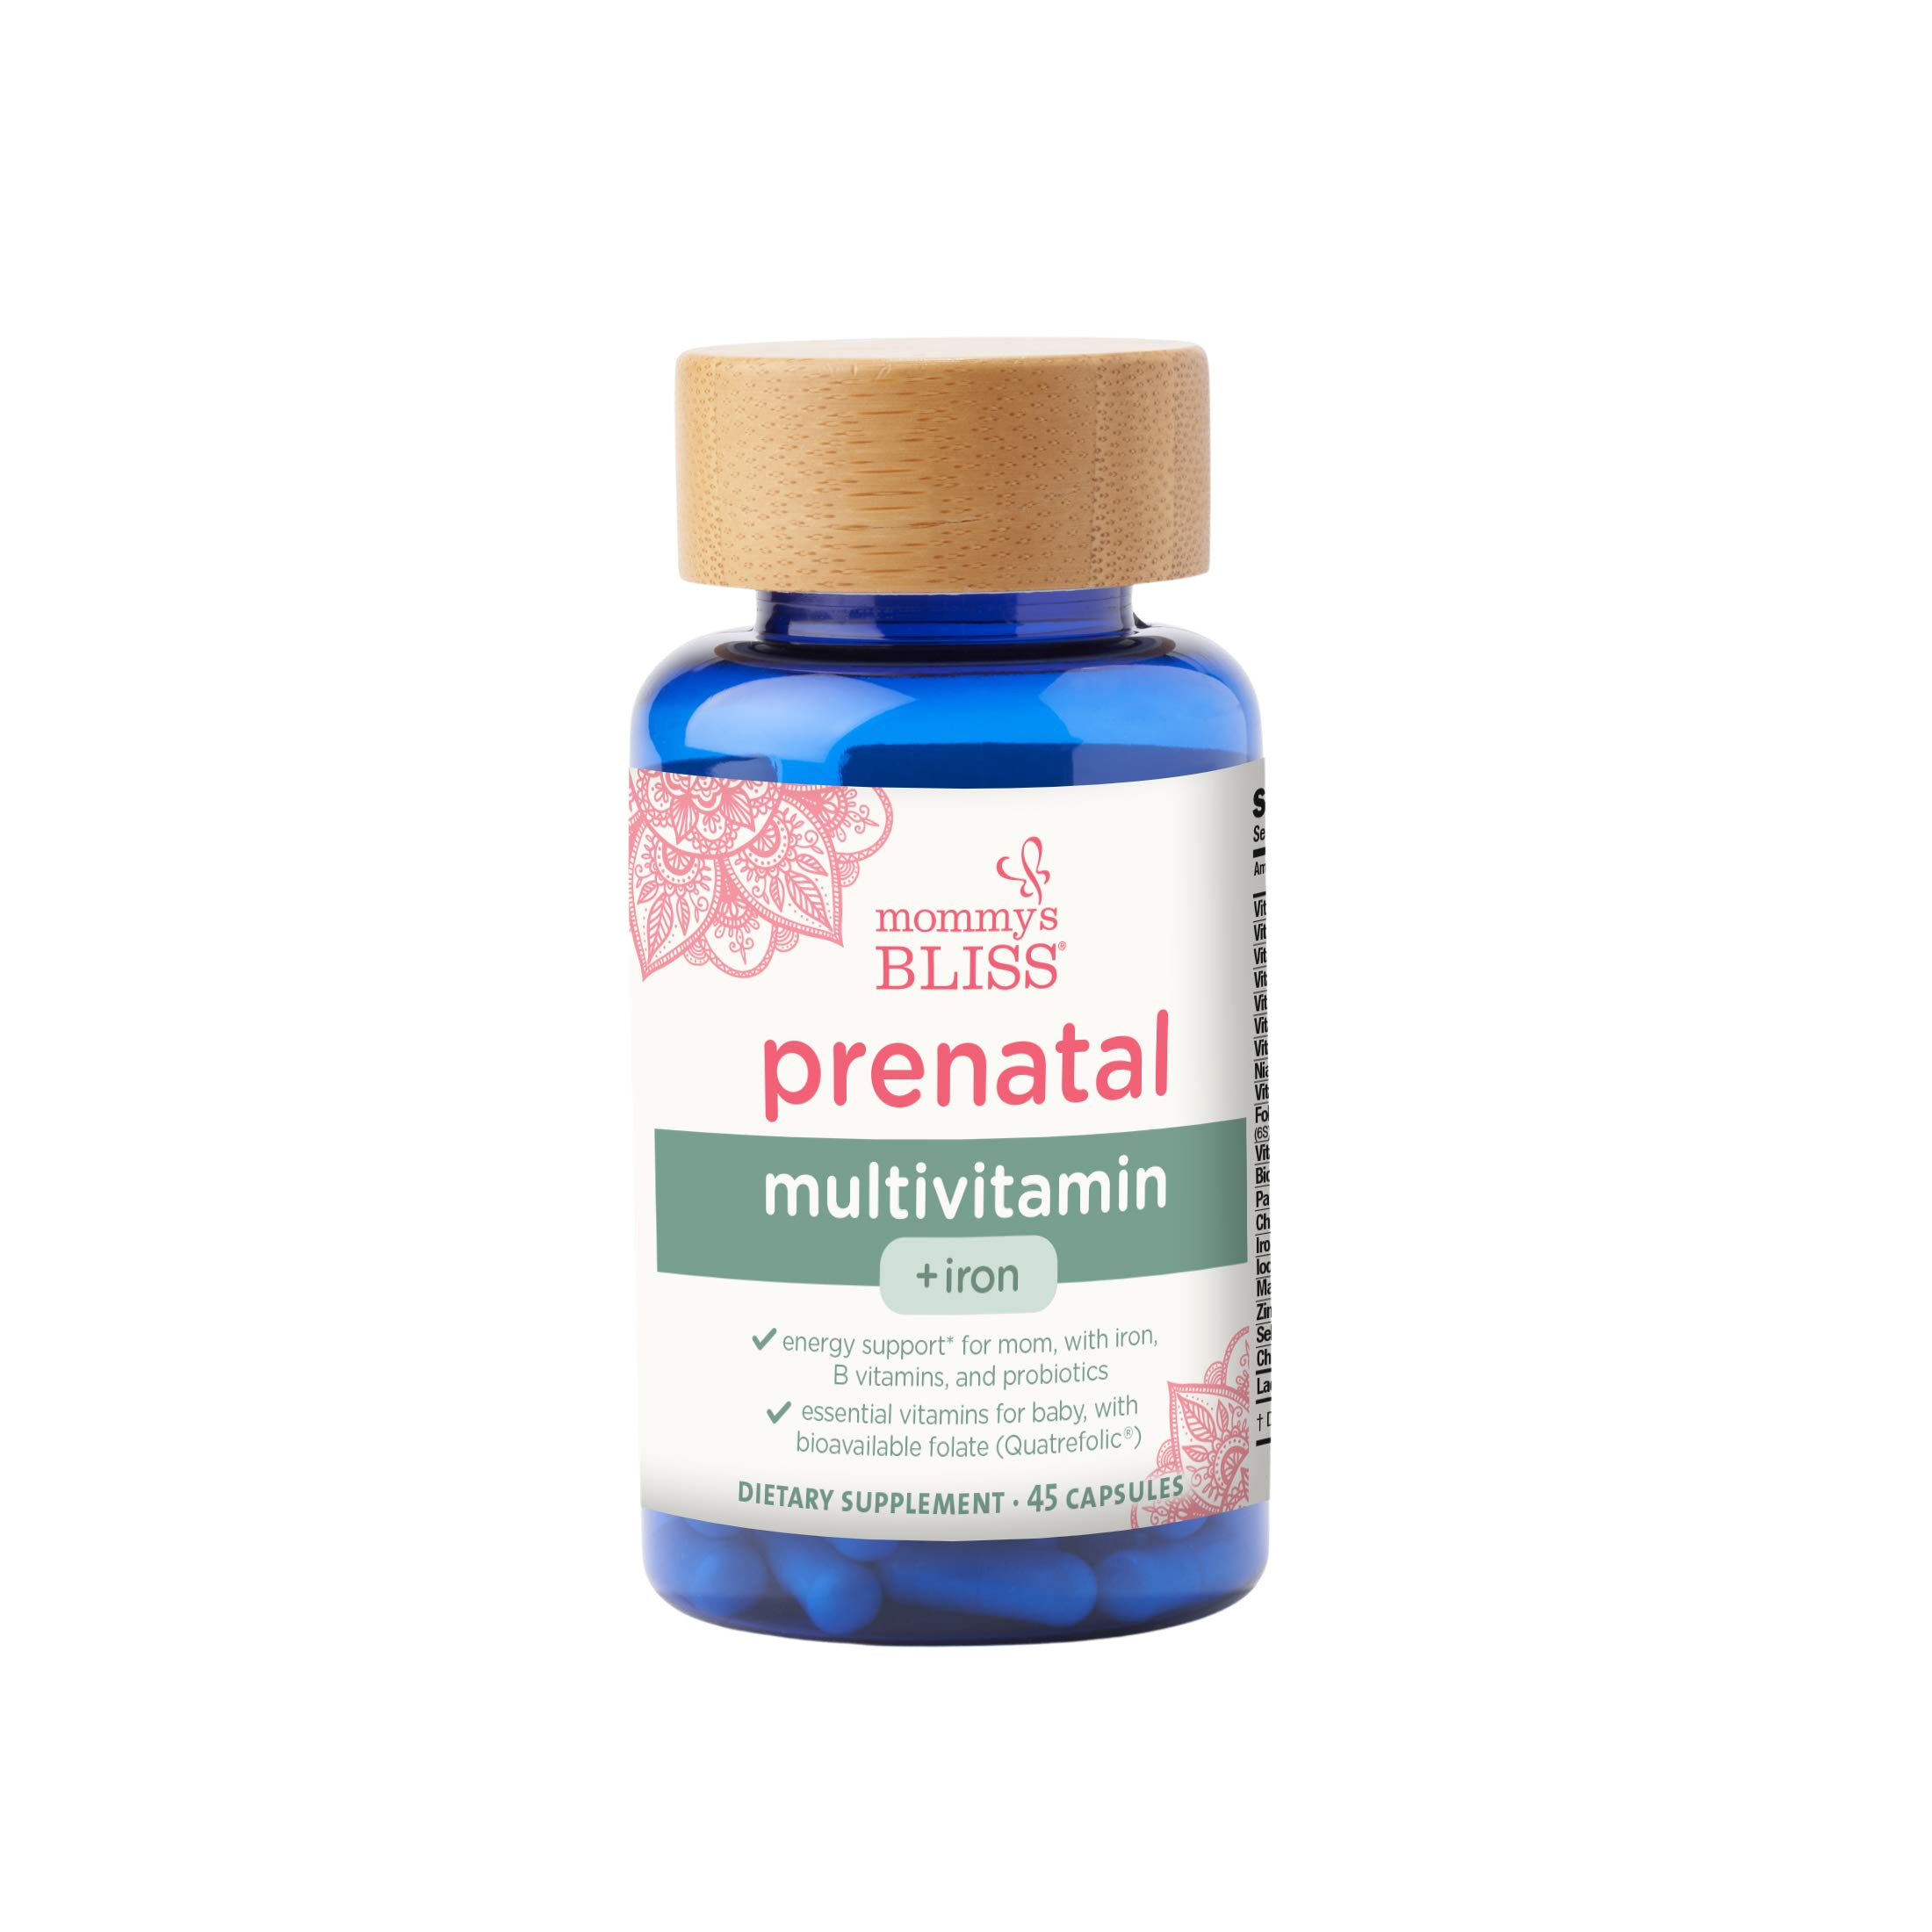 Mommy's Bliss Prenatal Multivitamin with Iron and Folic Acid